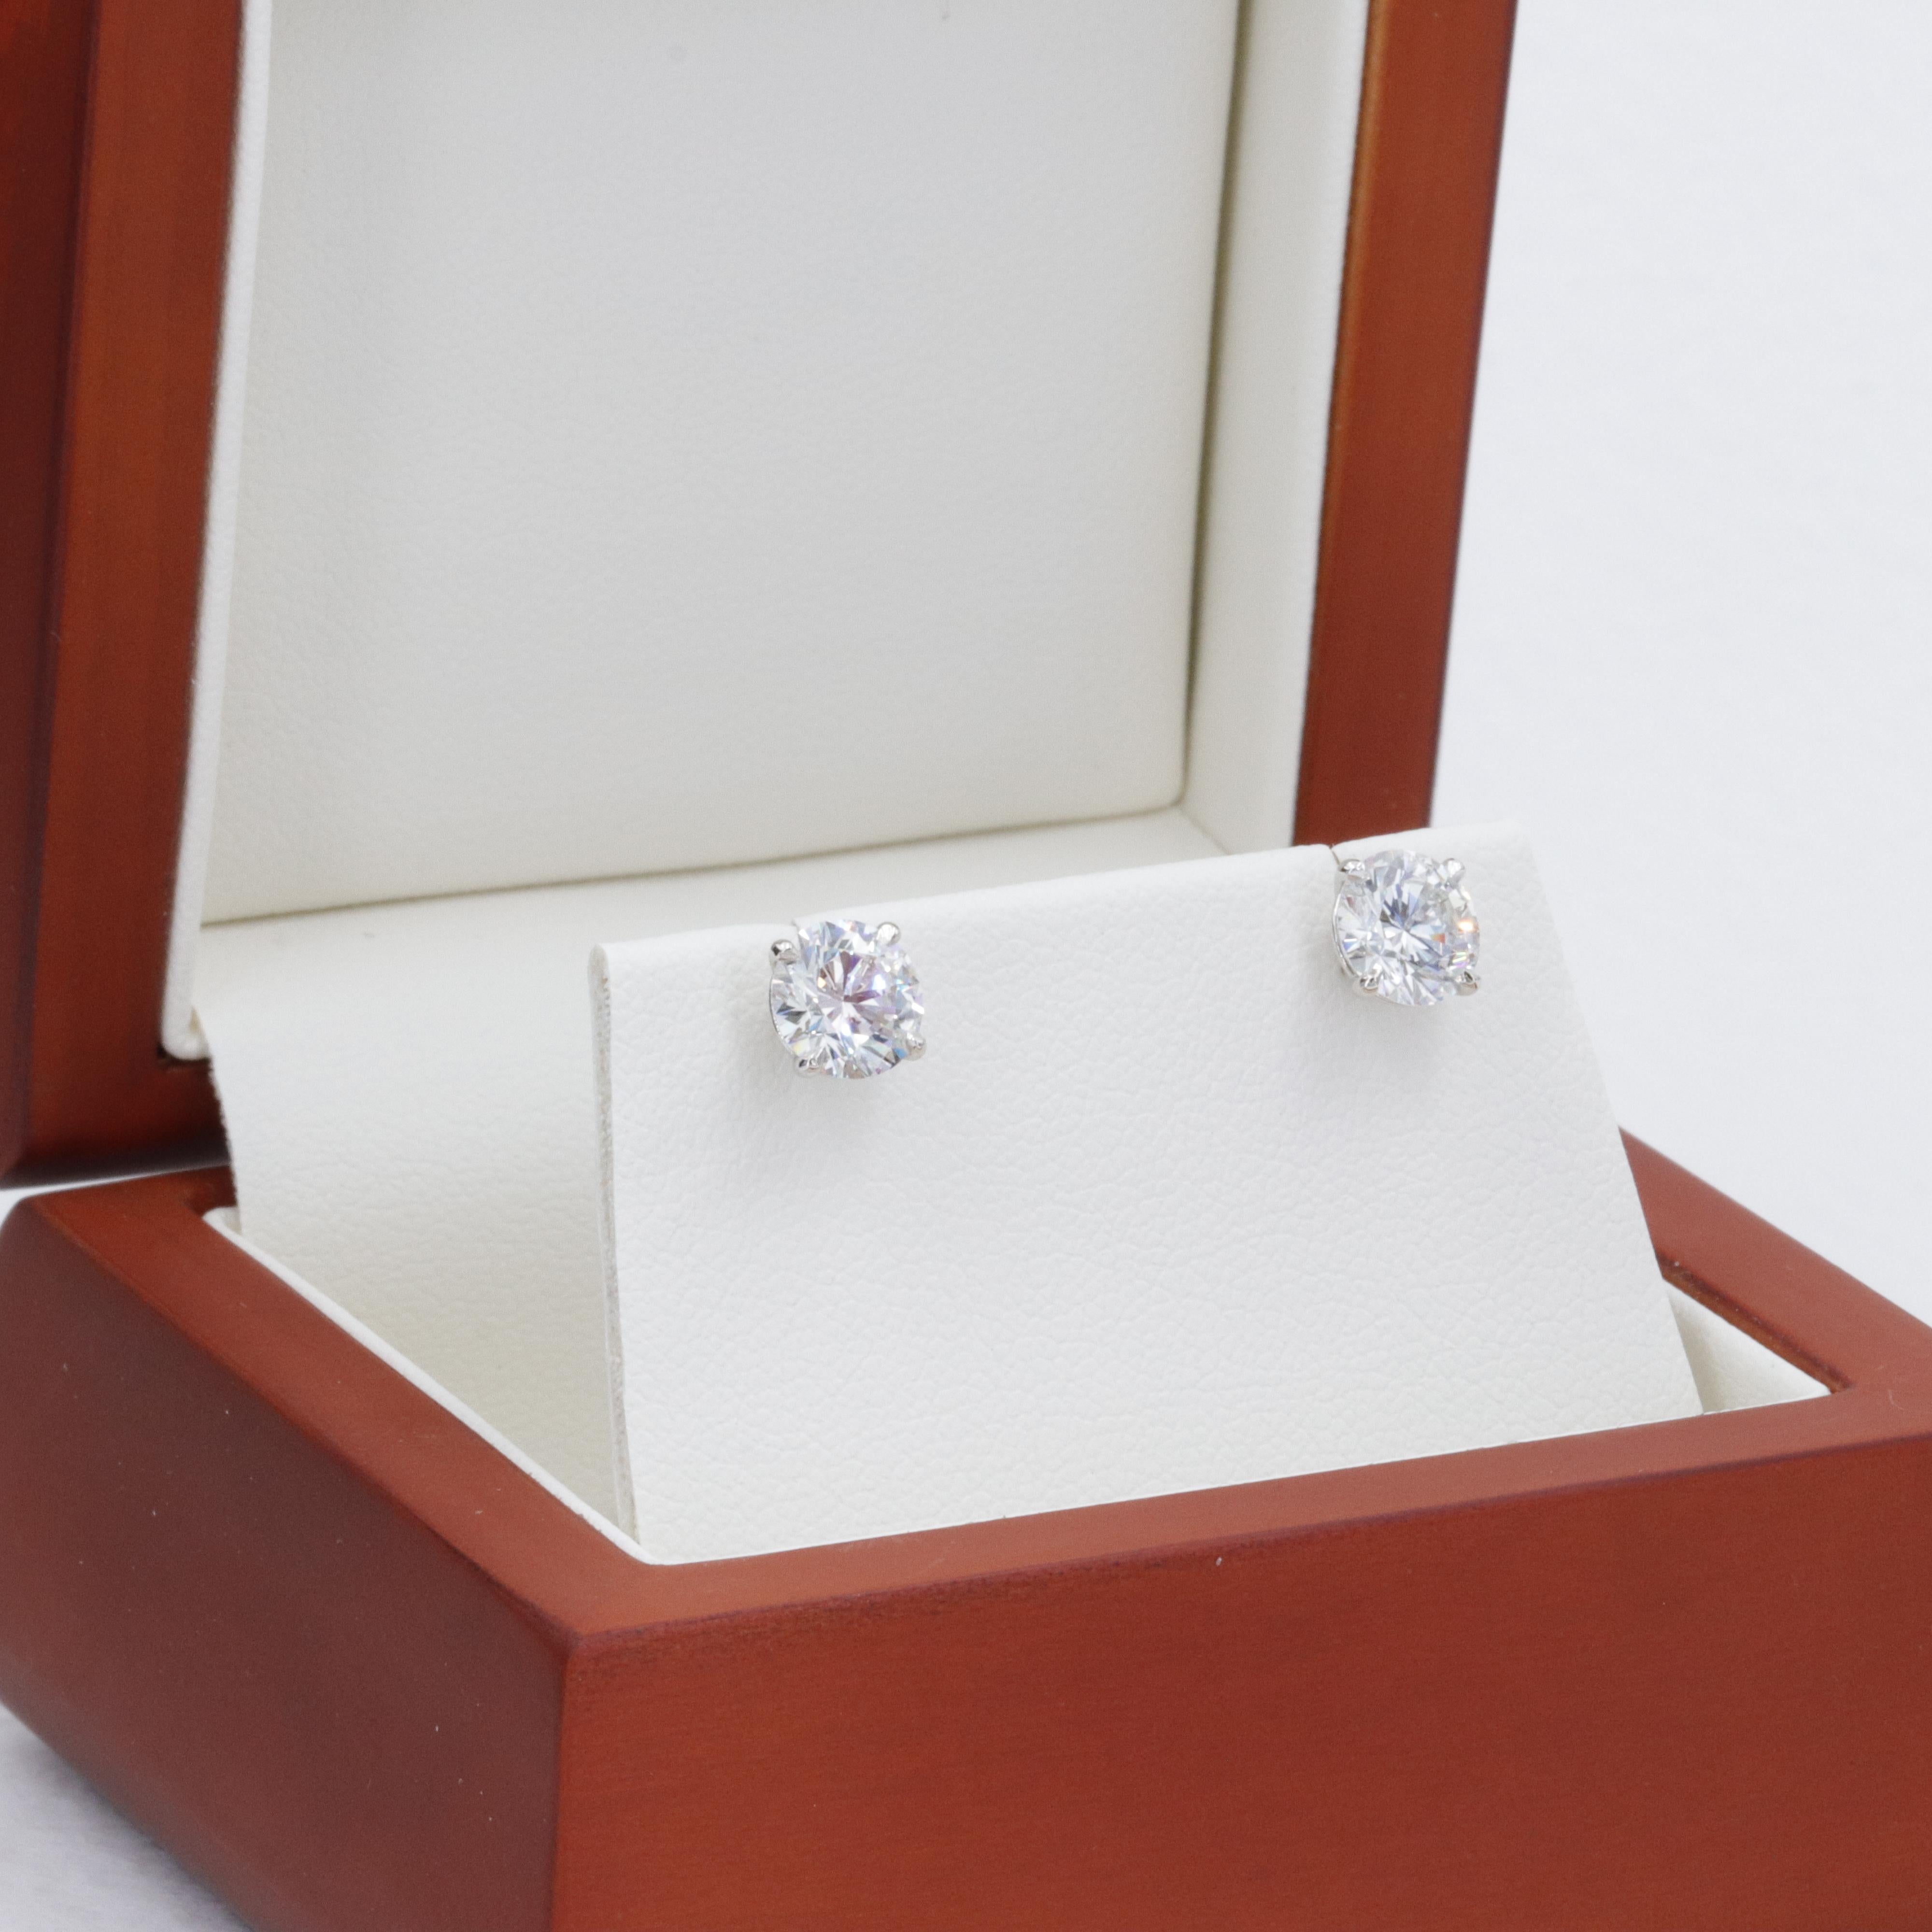 A fine pair of perfectly matched natural diamonds weighing 2.04 carats, with accompanying reports from the Gemological Institute of America (GIA) grading both of the diamonds as a bright white I in color with an exceptionally clean VS1 in clarity.